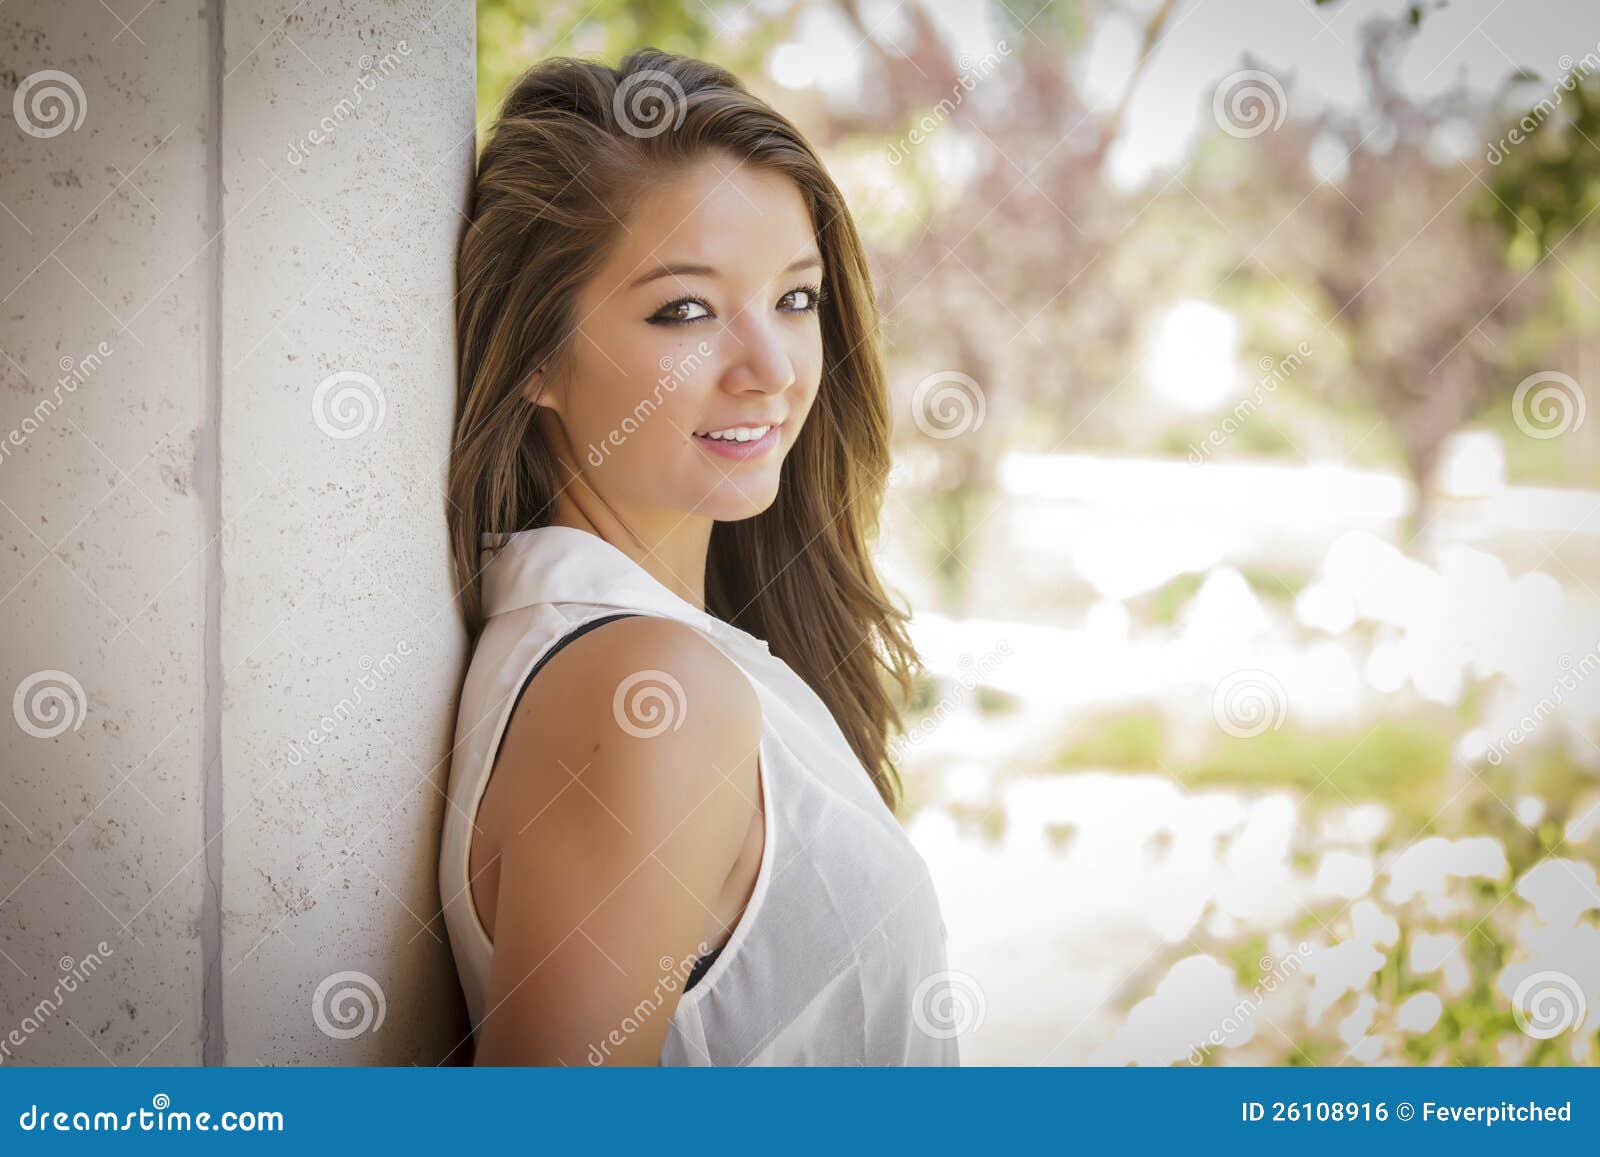 Pretty Teen Mixed Race Girl Outdoors Portrait Stock Photo Image Of